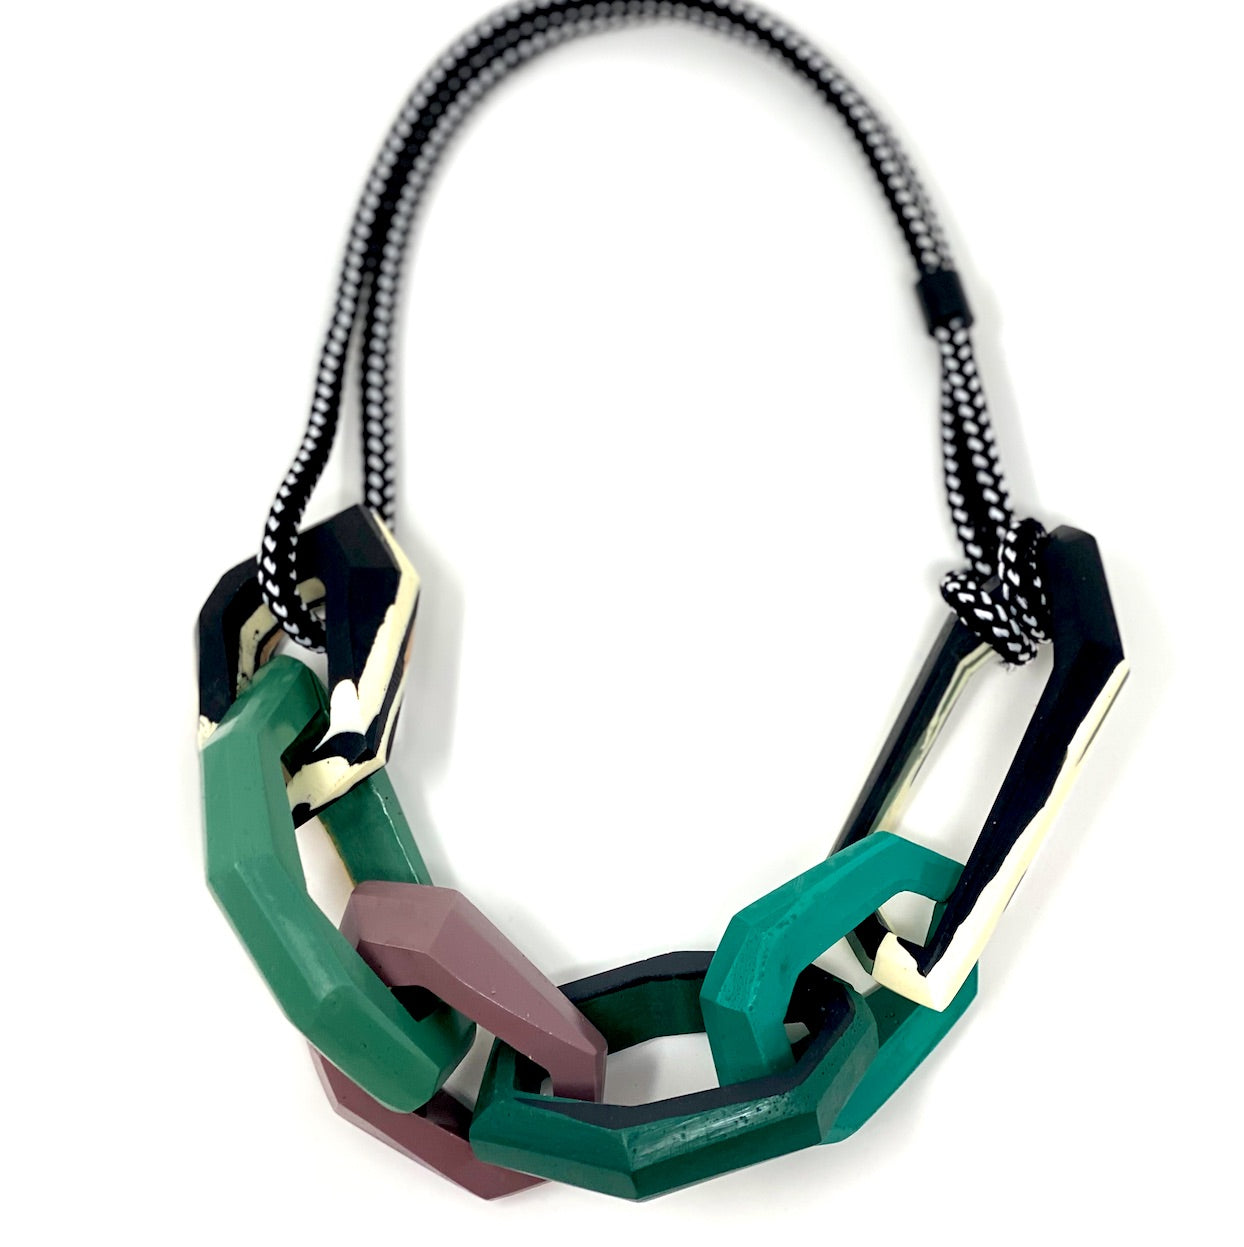 Maca Link Necklace, green, beige, black and white